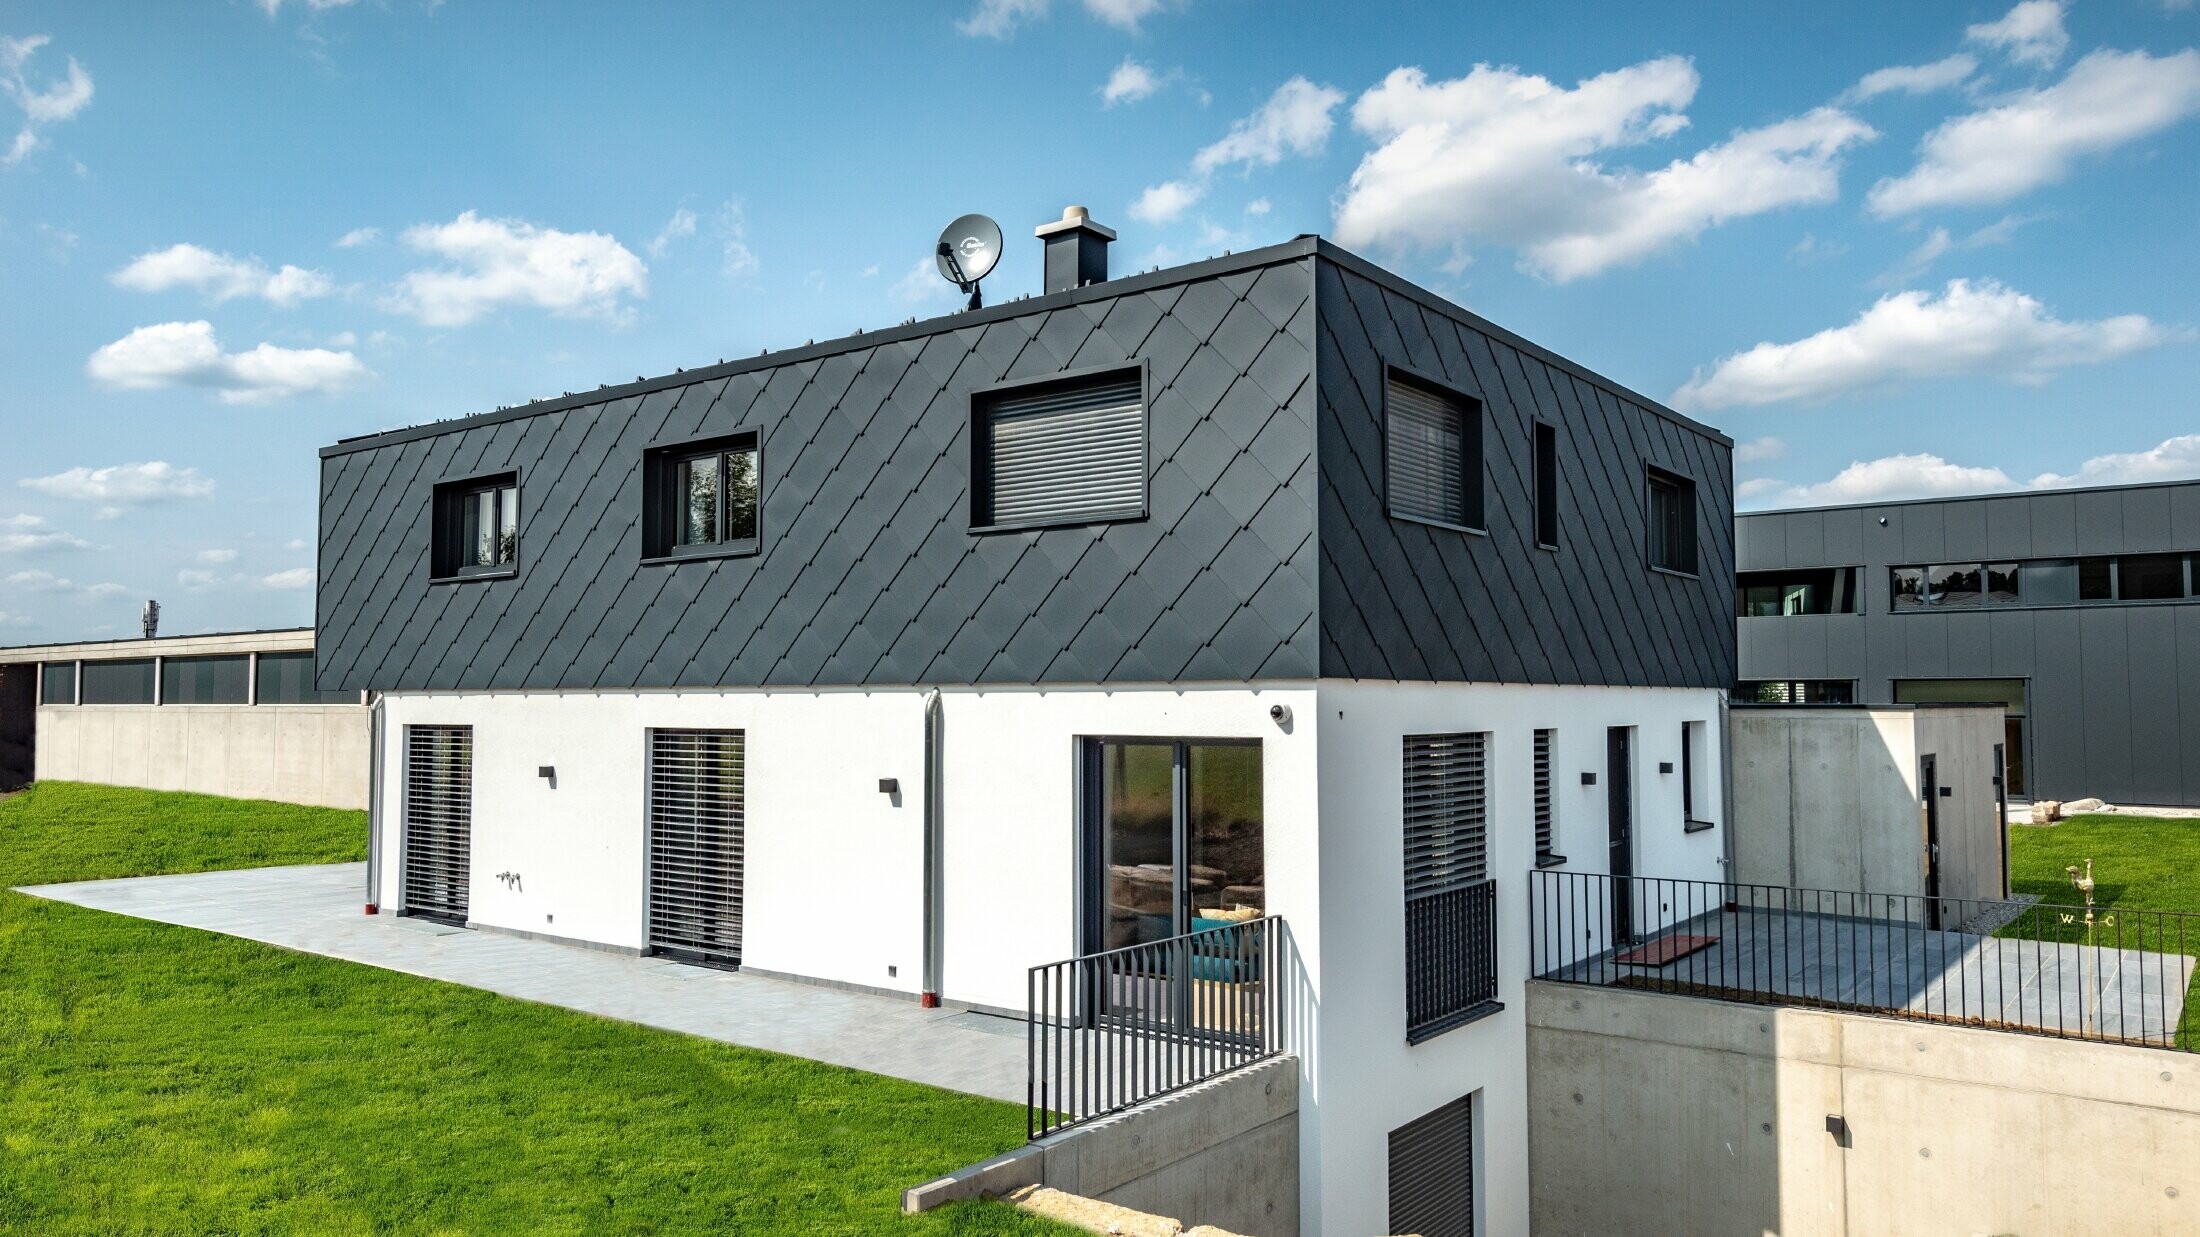 Modest new build with flat roof; the ground floor has a white plaster finish while the upper floor is clad in the large PREFA rhomboid façade tile in anthracite.